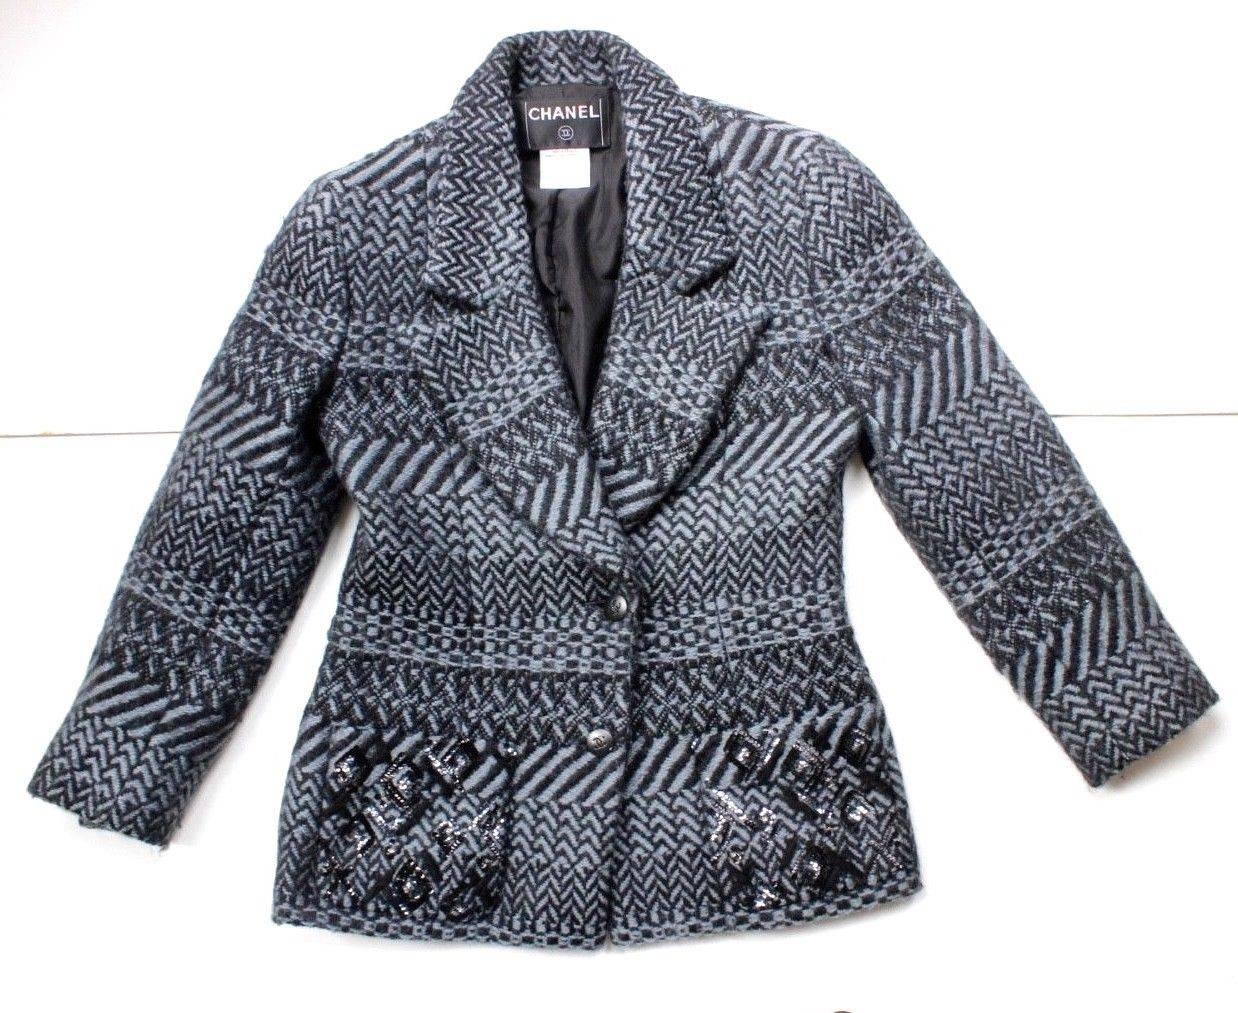 Authentic Chanel Blue Chevron Wool Sequin Jacket F 38 uk 10
Stunning Jacket from Chanel in in black and blue cheveron stripes 
Black logo buttons with sequins to the pockets 
Lined in silk with chain to inside hem 
Length 25 inches, chest 18 inches